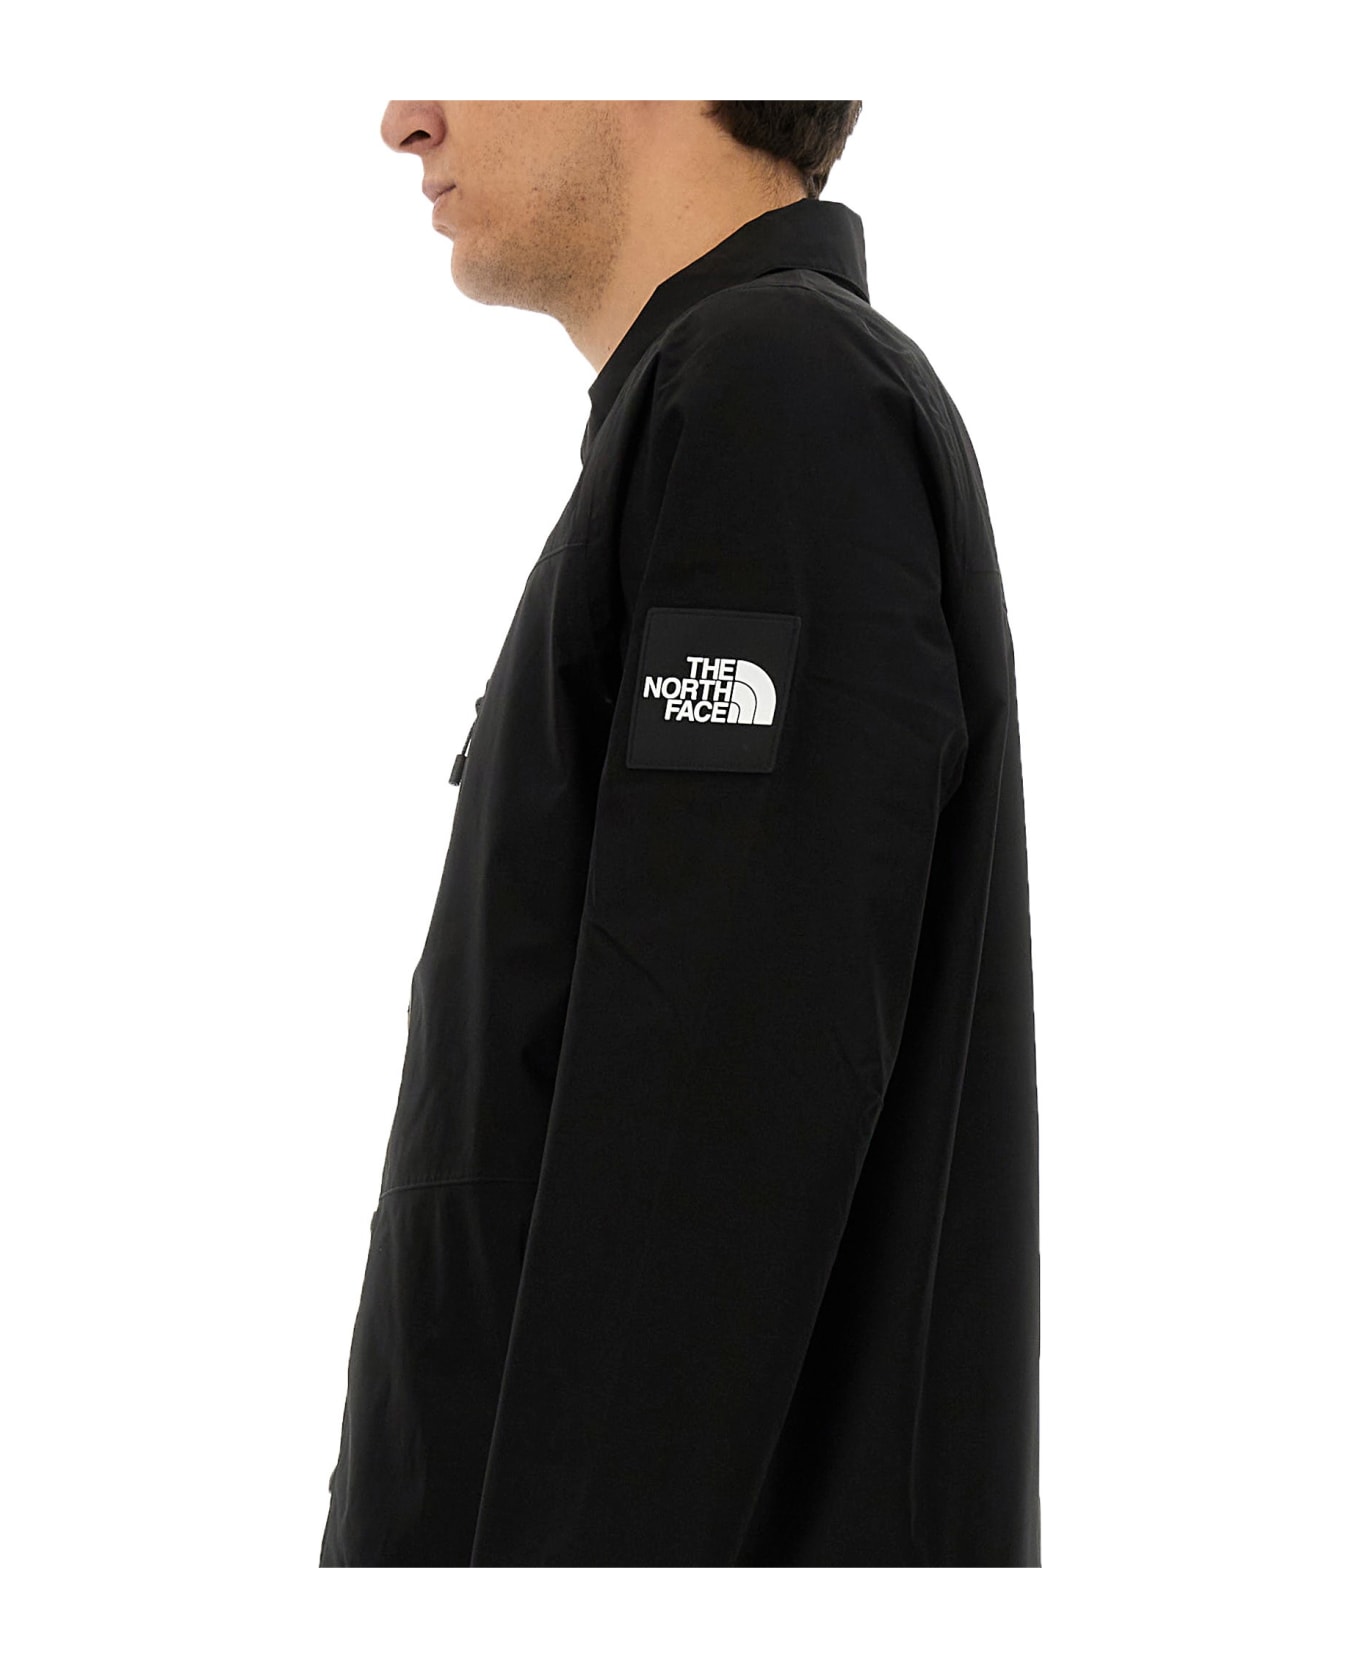 The North Face Jacket With Logo ジャケット